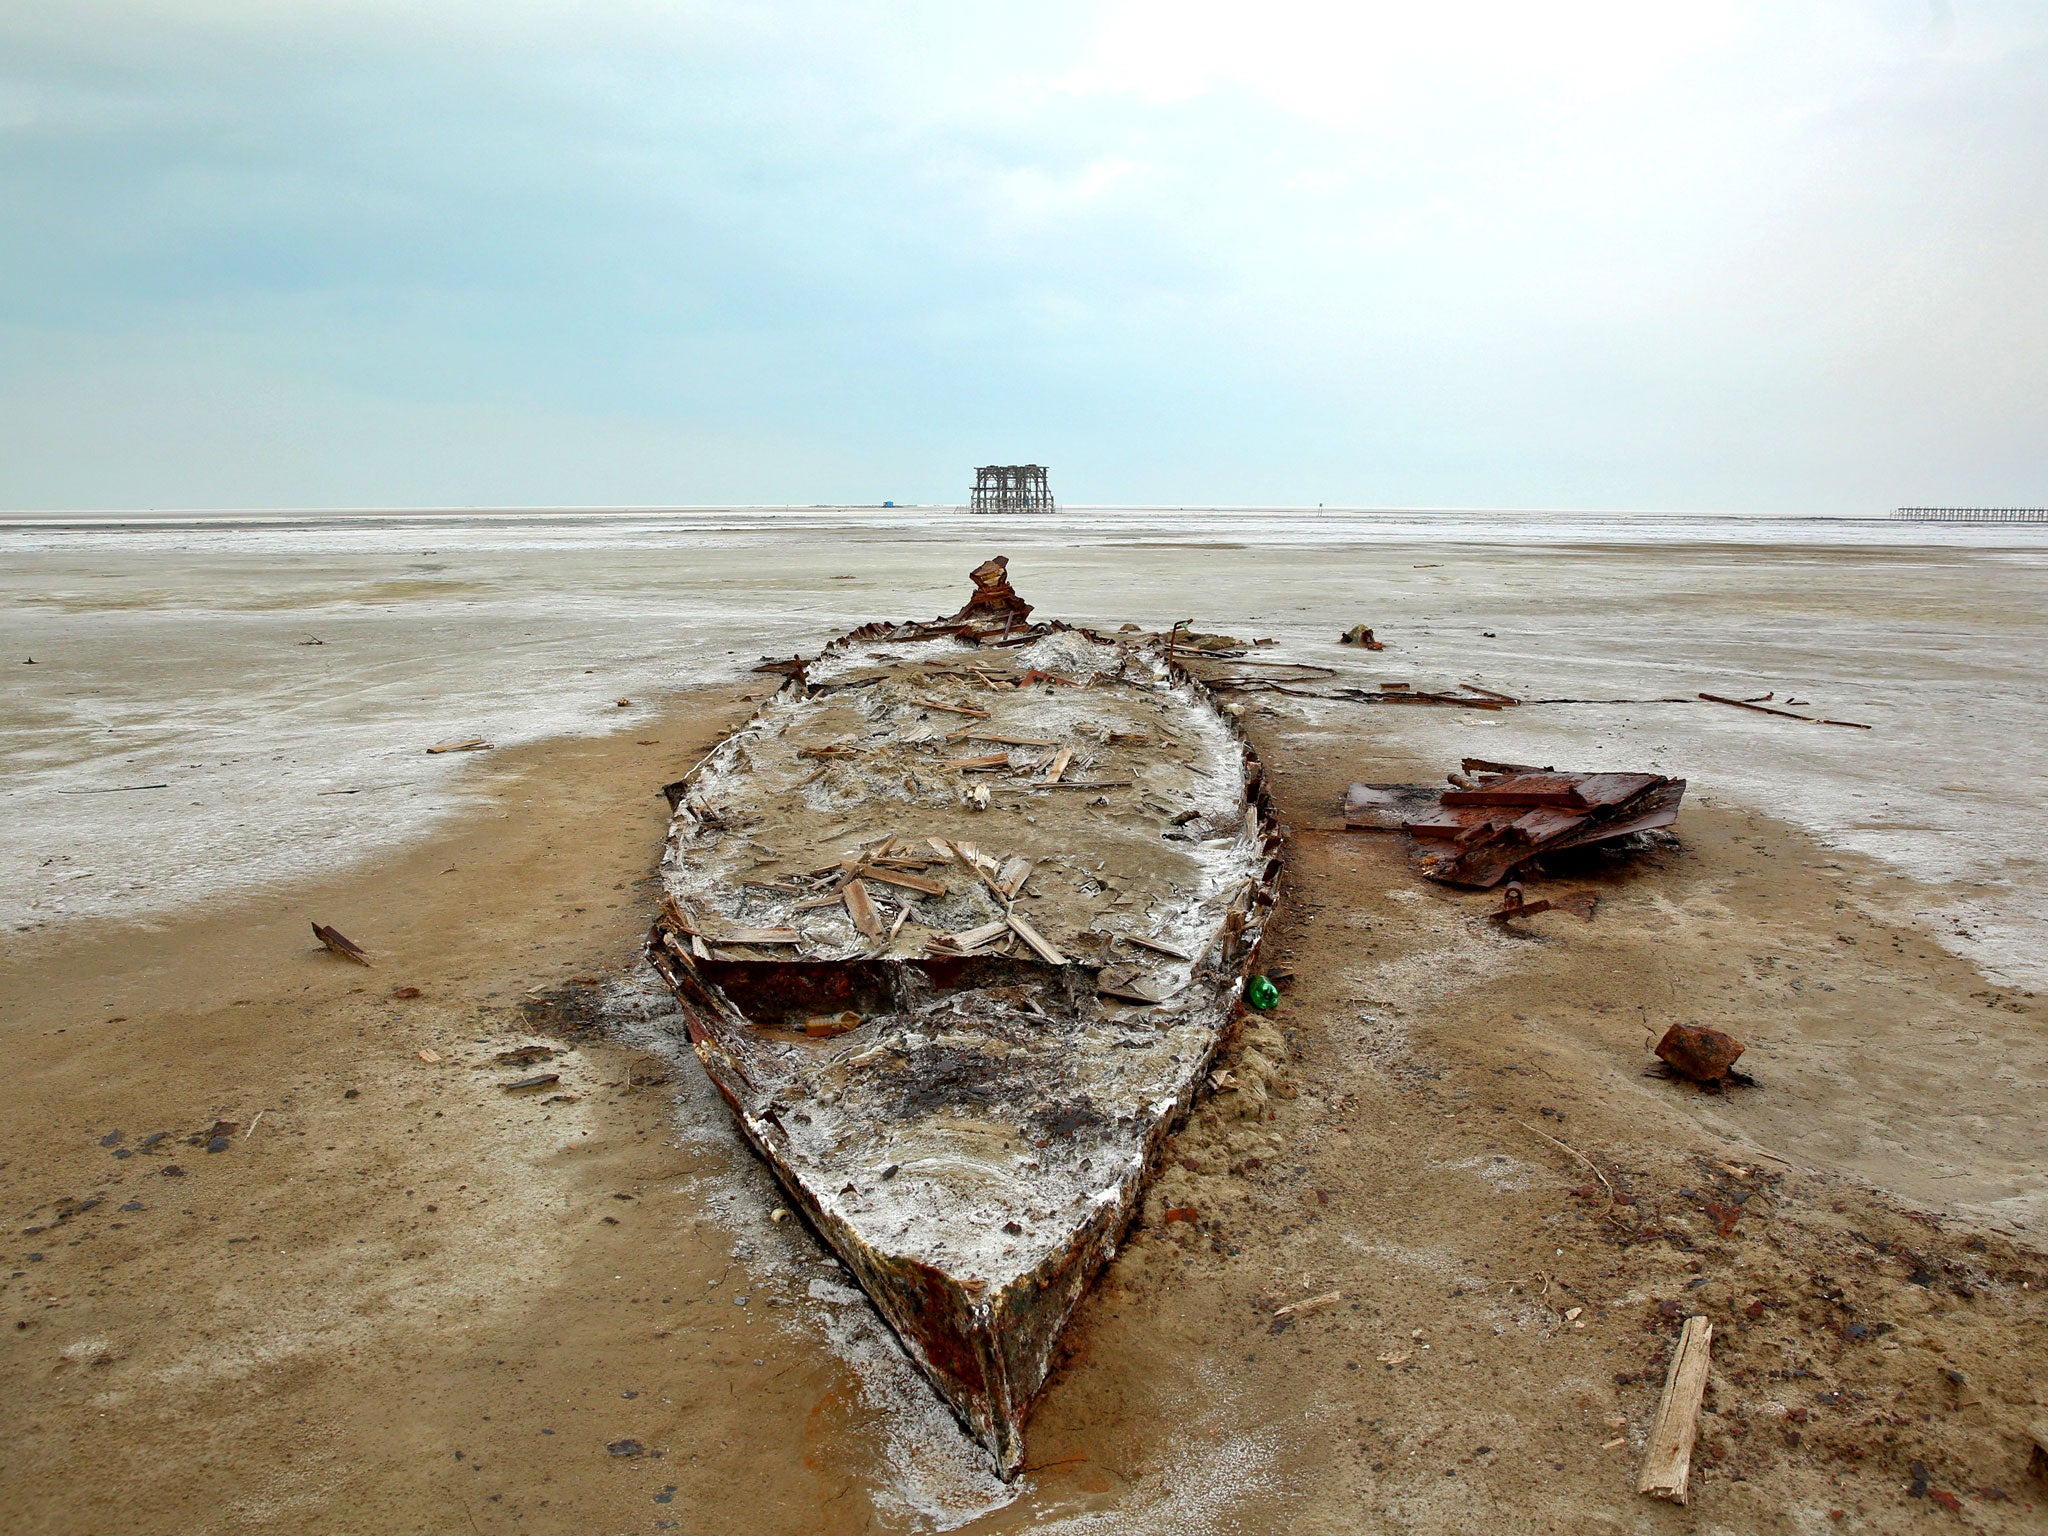 A wreckage of a boat is stuck in the solidified salts and sands at Lake Oroumieh